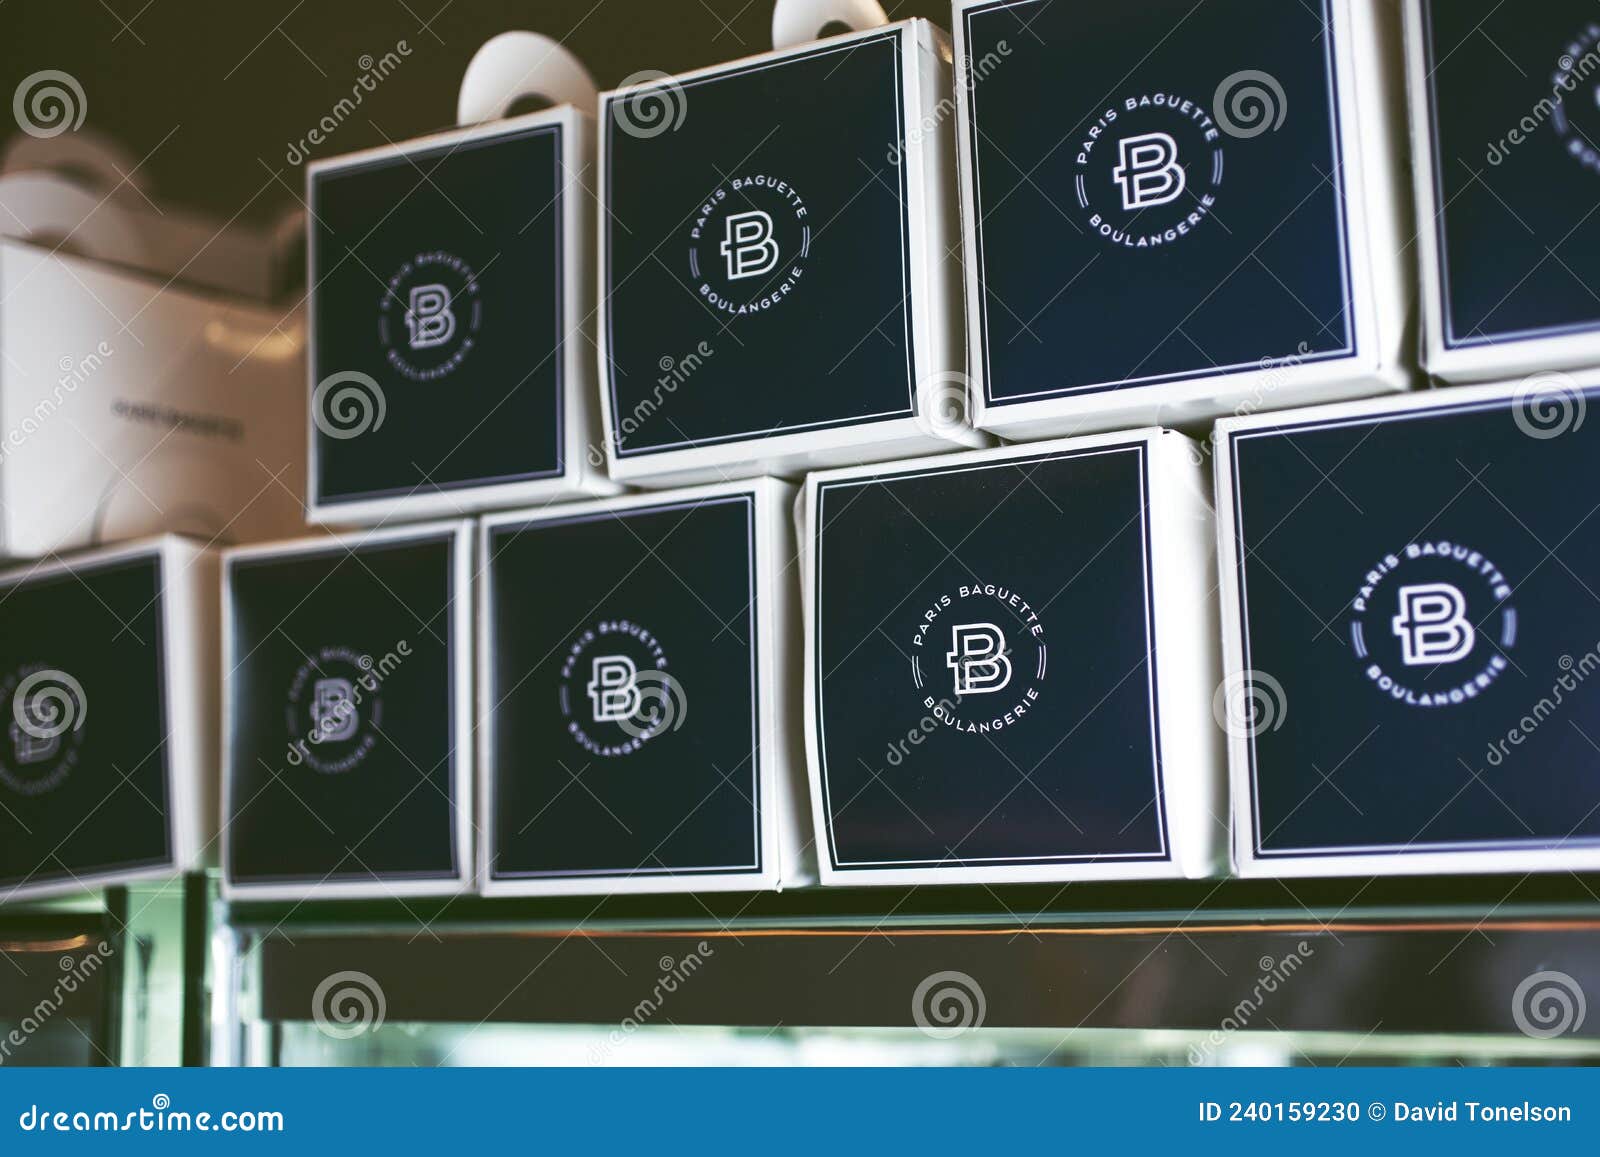 https://thumbs.dreamstime.com/z/paris-baguette-logo-to-go-boxes-los-angeles-california-united-states-view-several-to-go-containers-korean-pastry-240159230.jpg